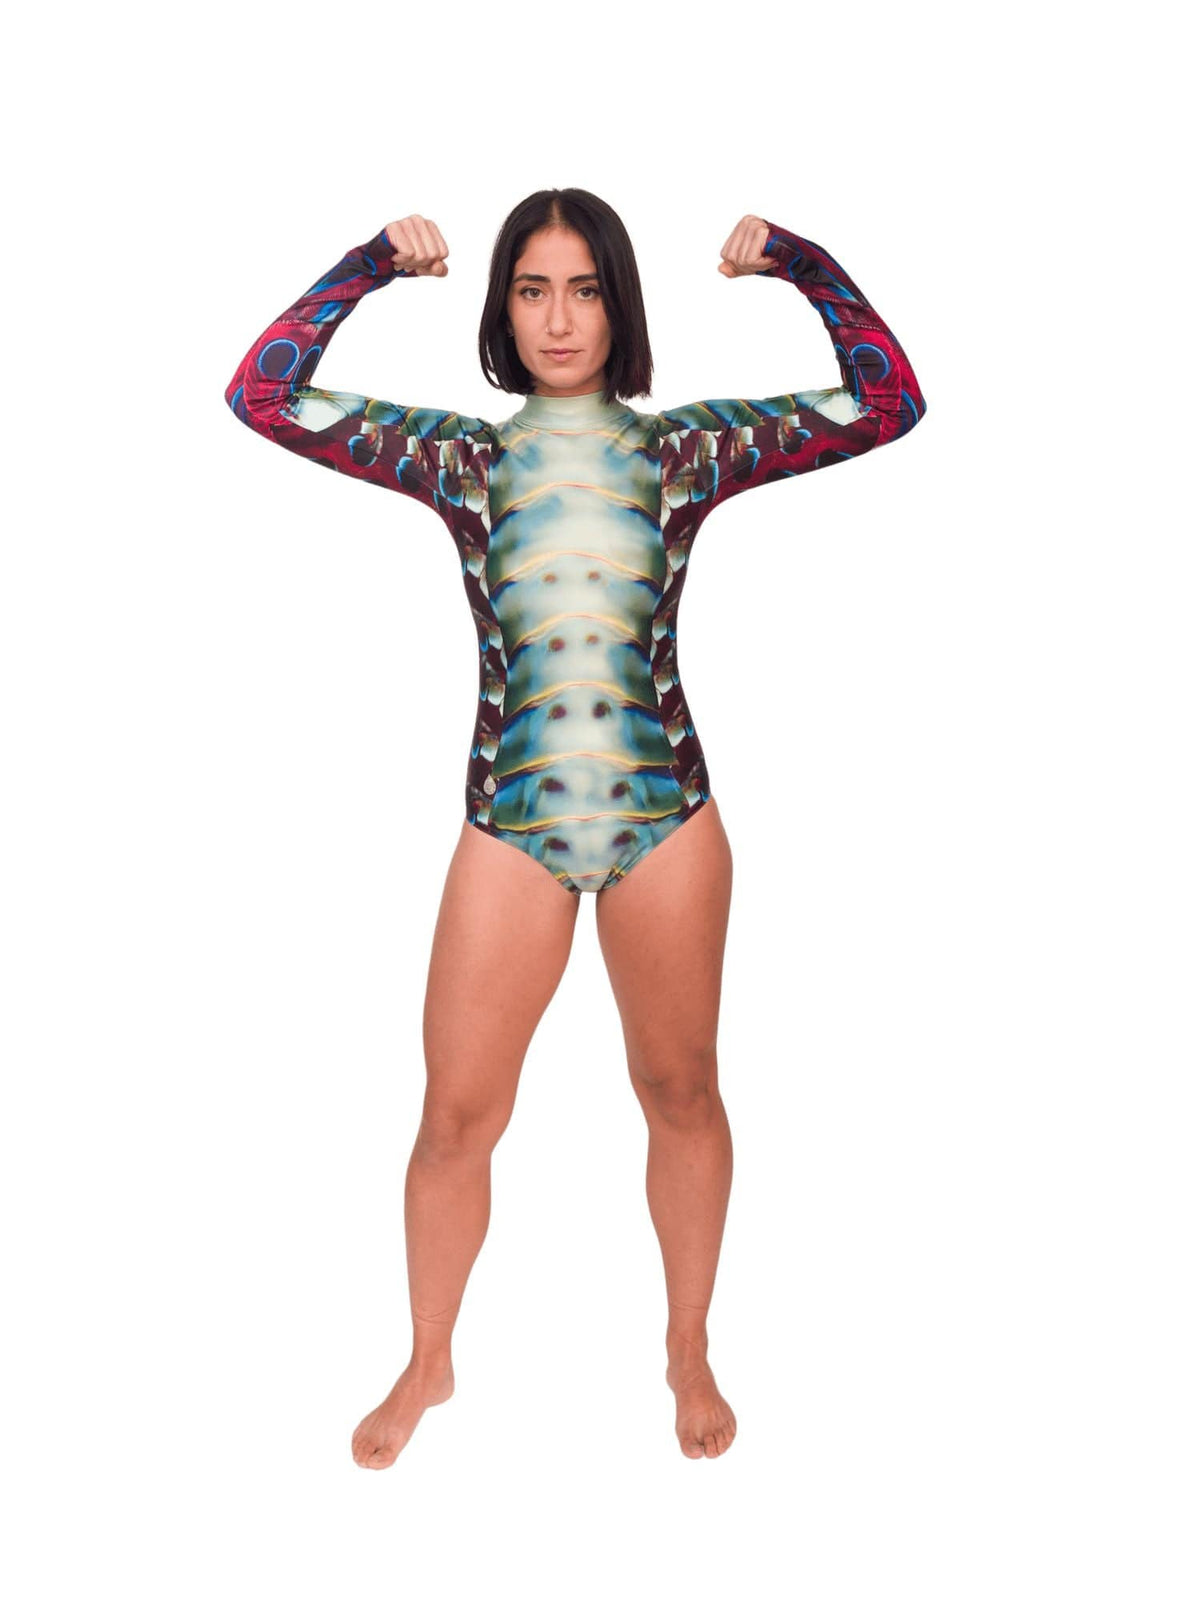 Model: Shireen is an underwater photographer, filmmaker, and scientist. She is 5&#39;7&quot;, 145lbs, and wearing a size M Sun Suit.